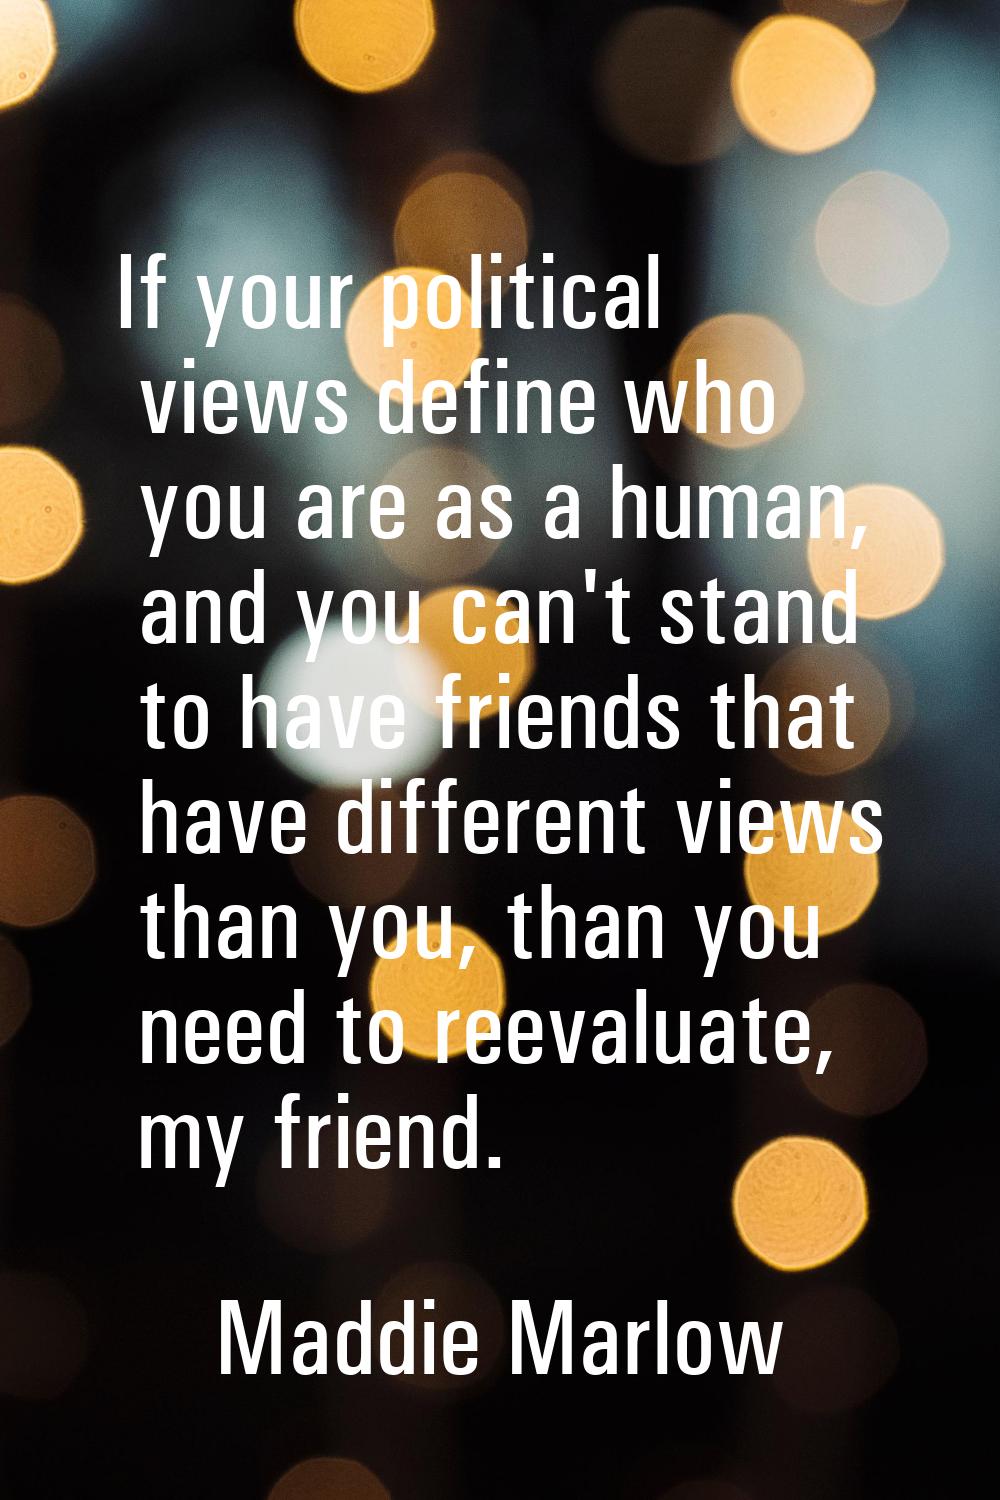 If your political views define who you are as a human, and you can't stand to have friends that hav